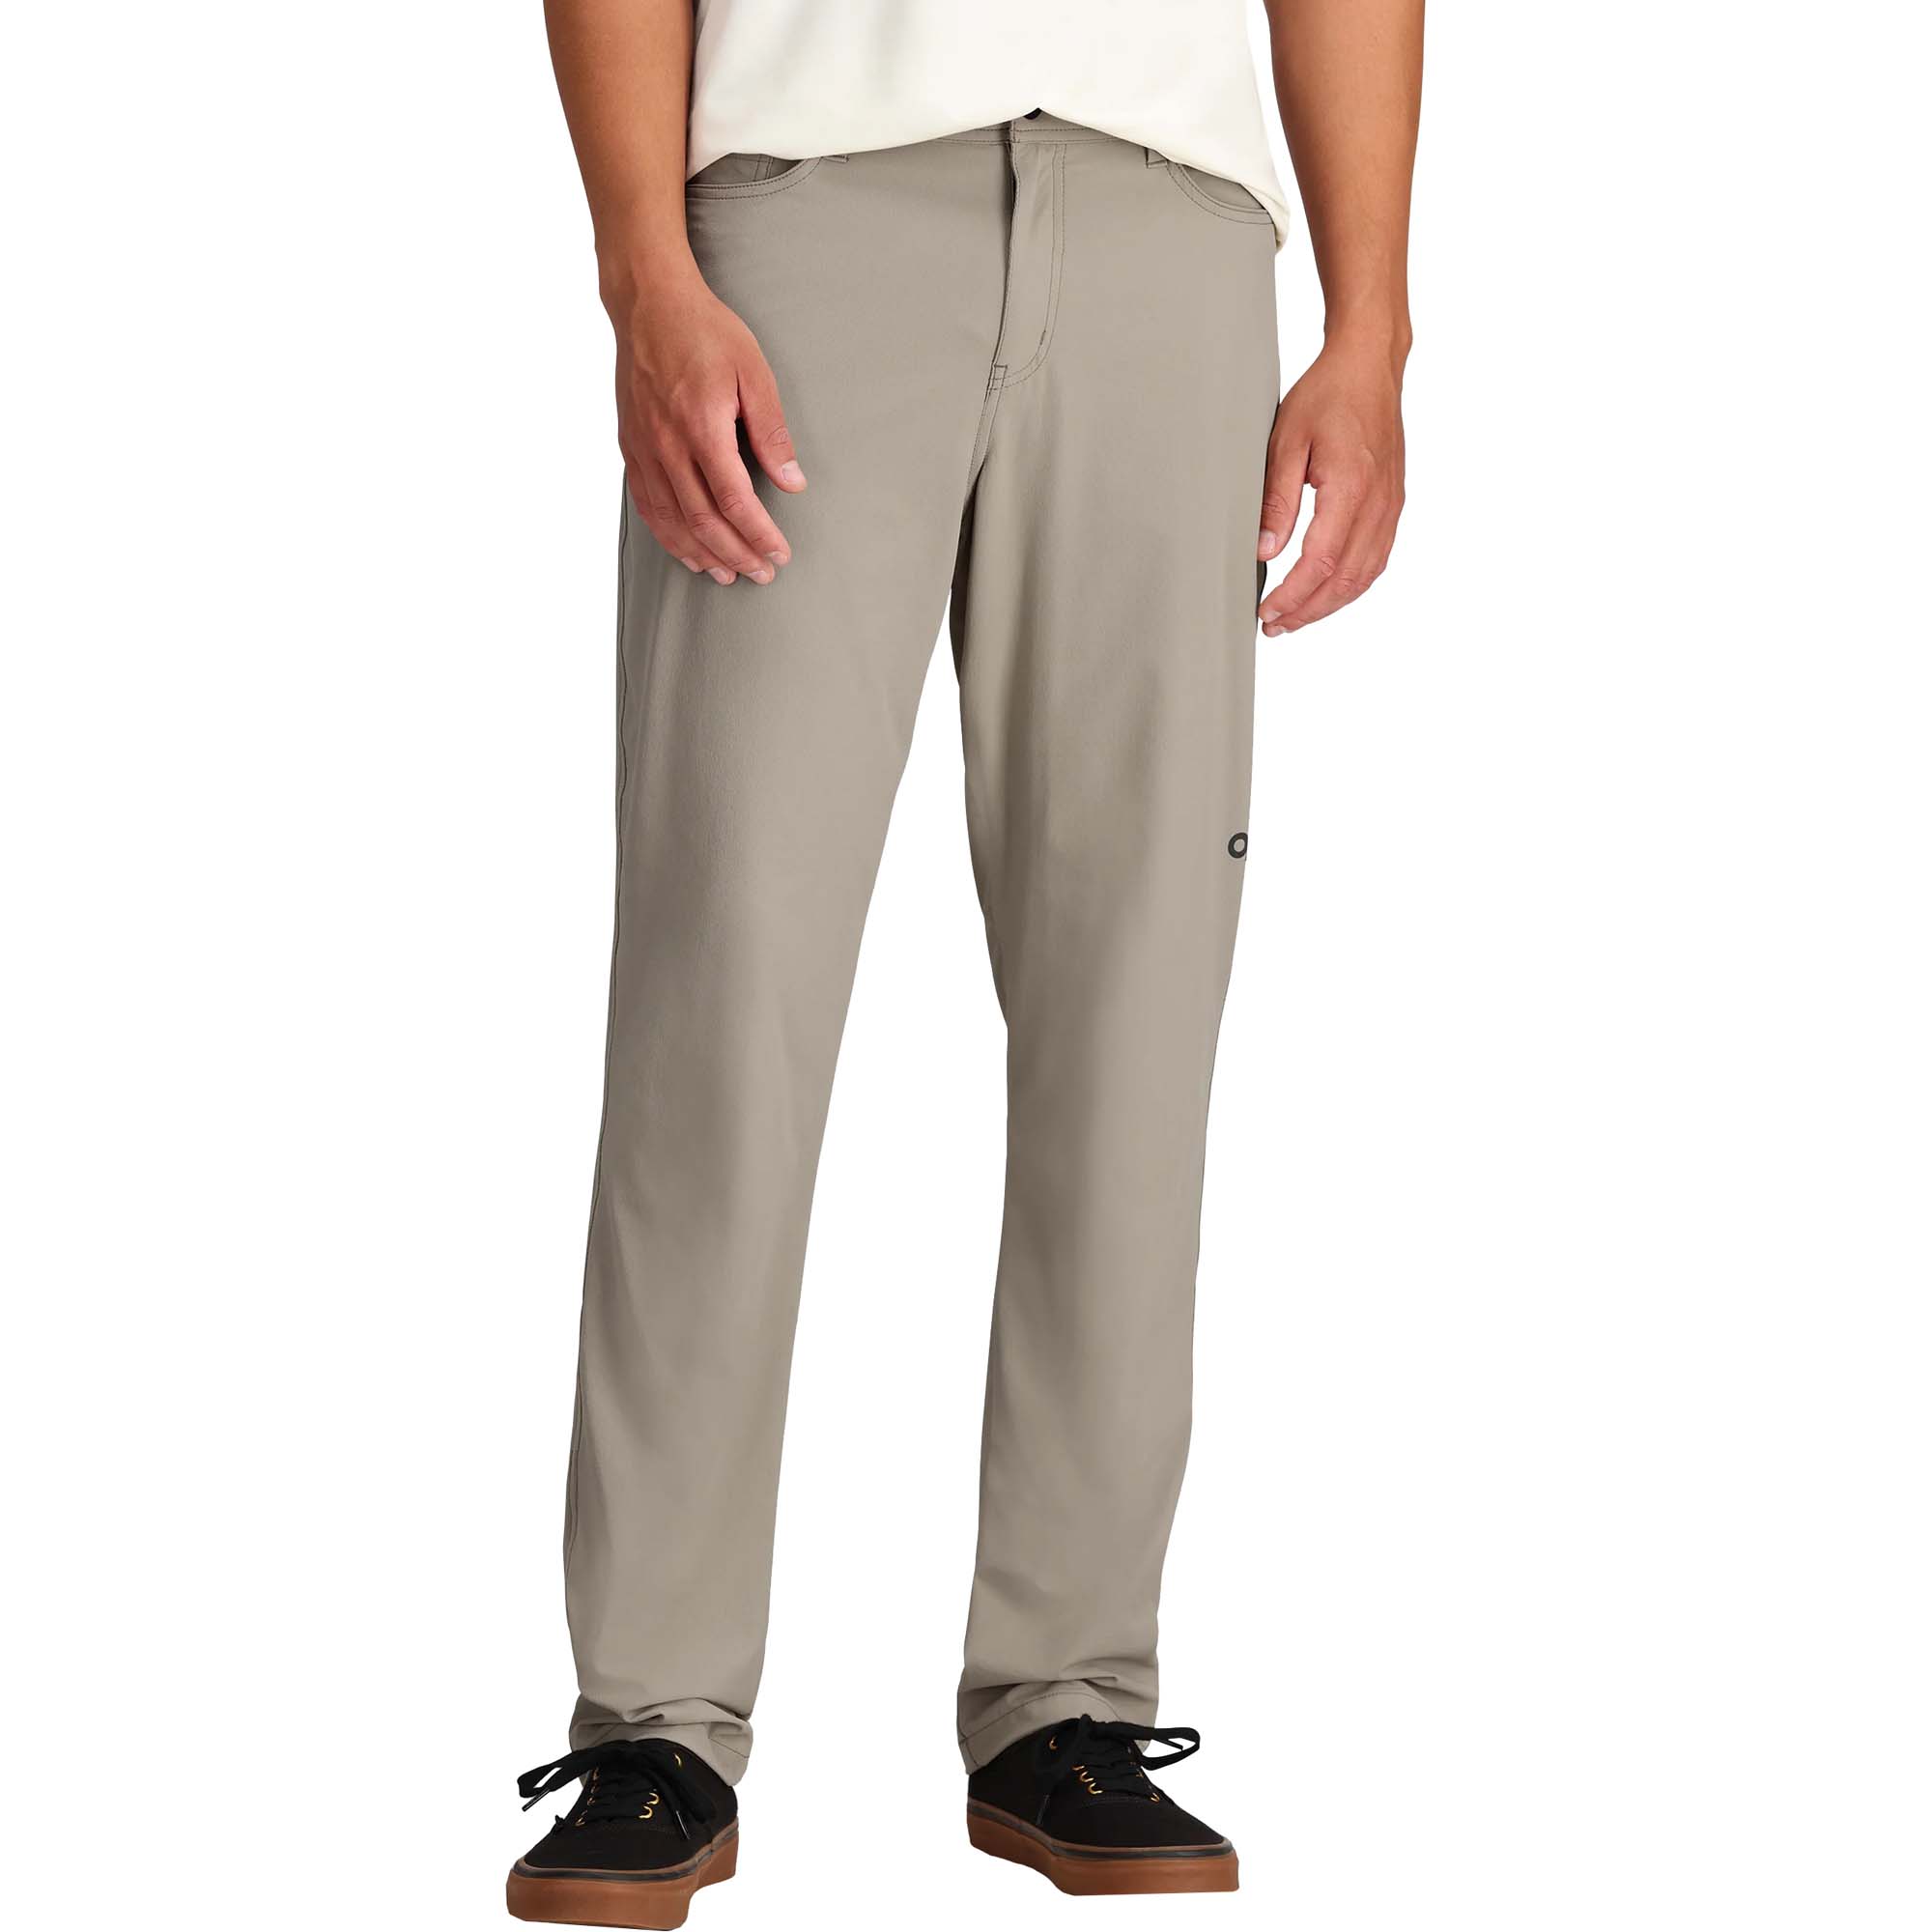 Outdoor Research Ferrosi Transit Technical Pants